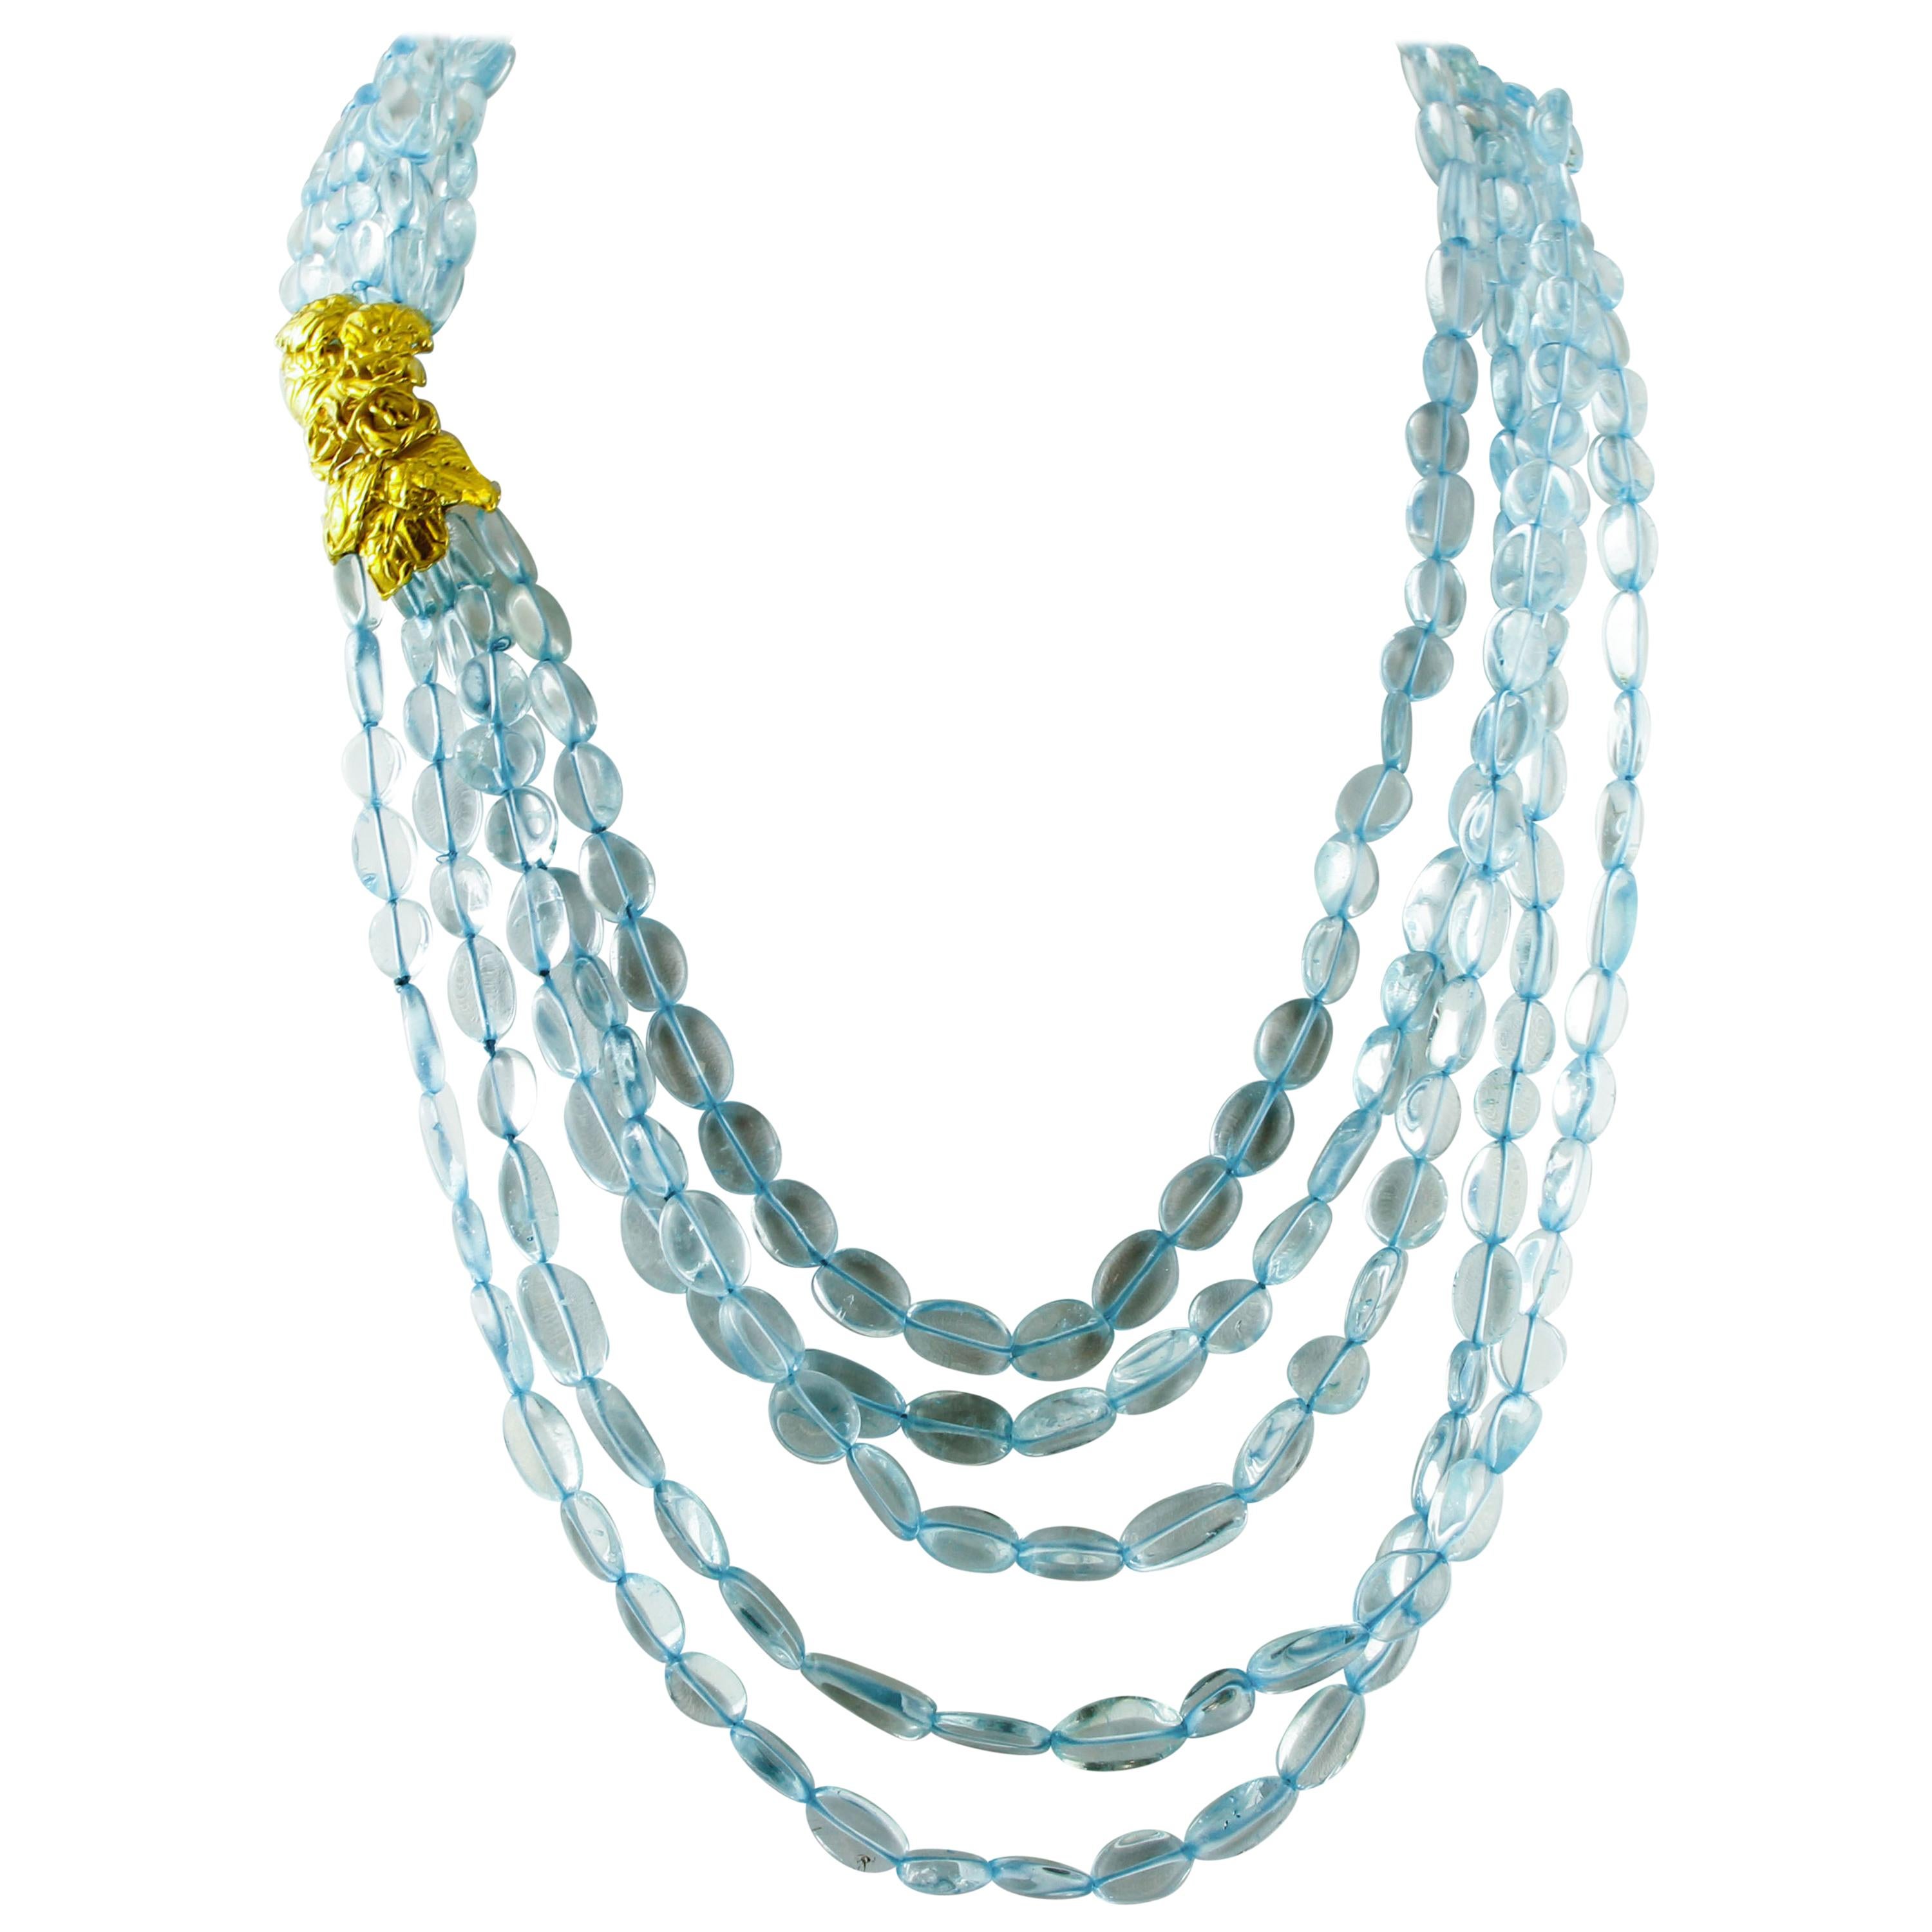 257 g Rock Crystal Multi-Strands Necklace with 18 Karat Yellow Gold Closure